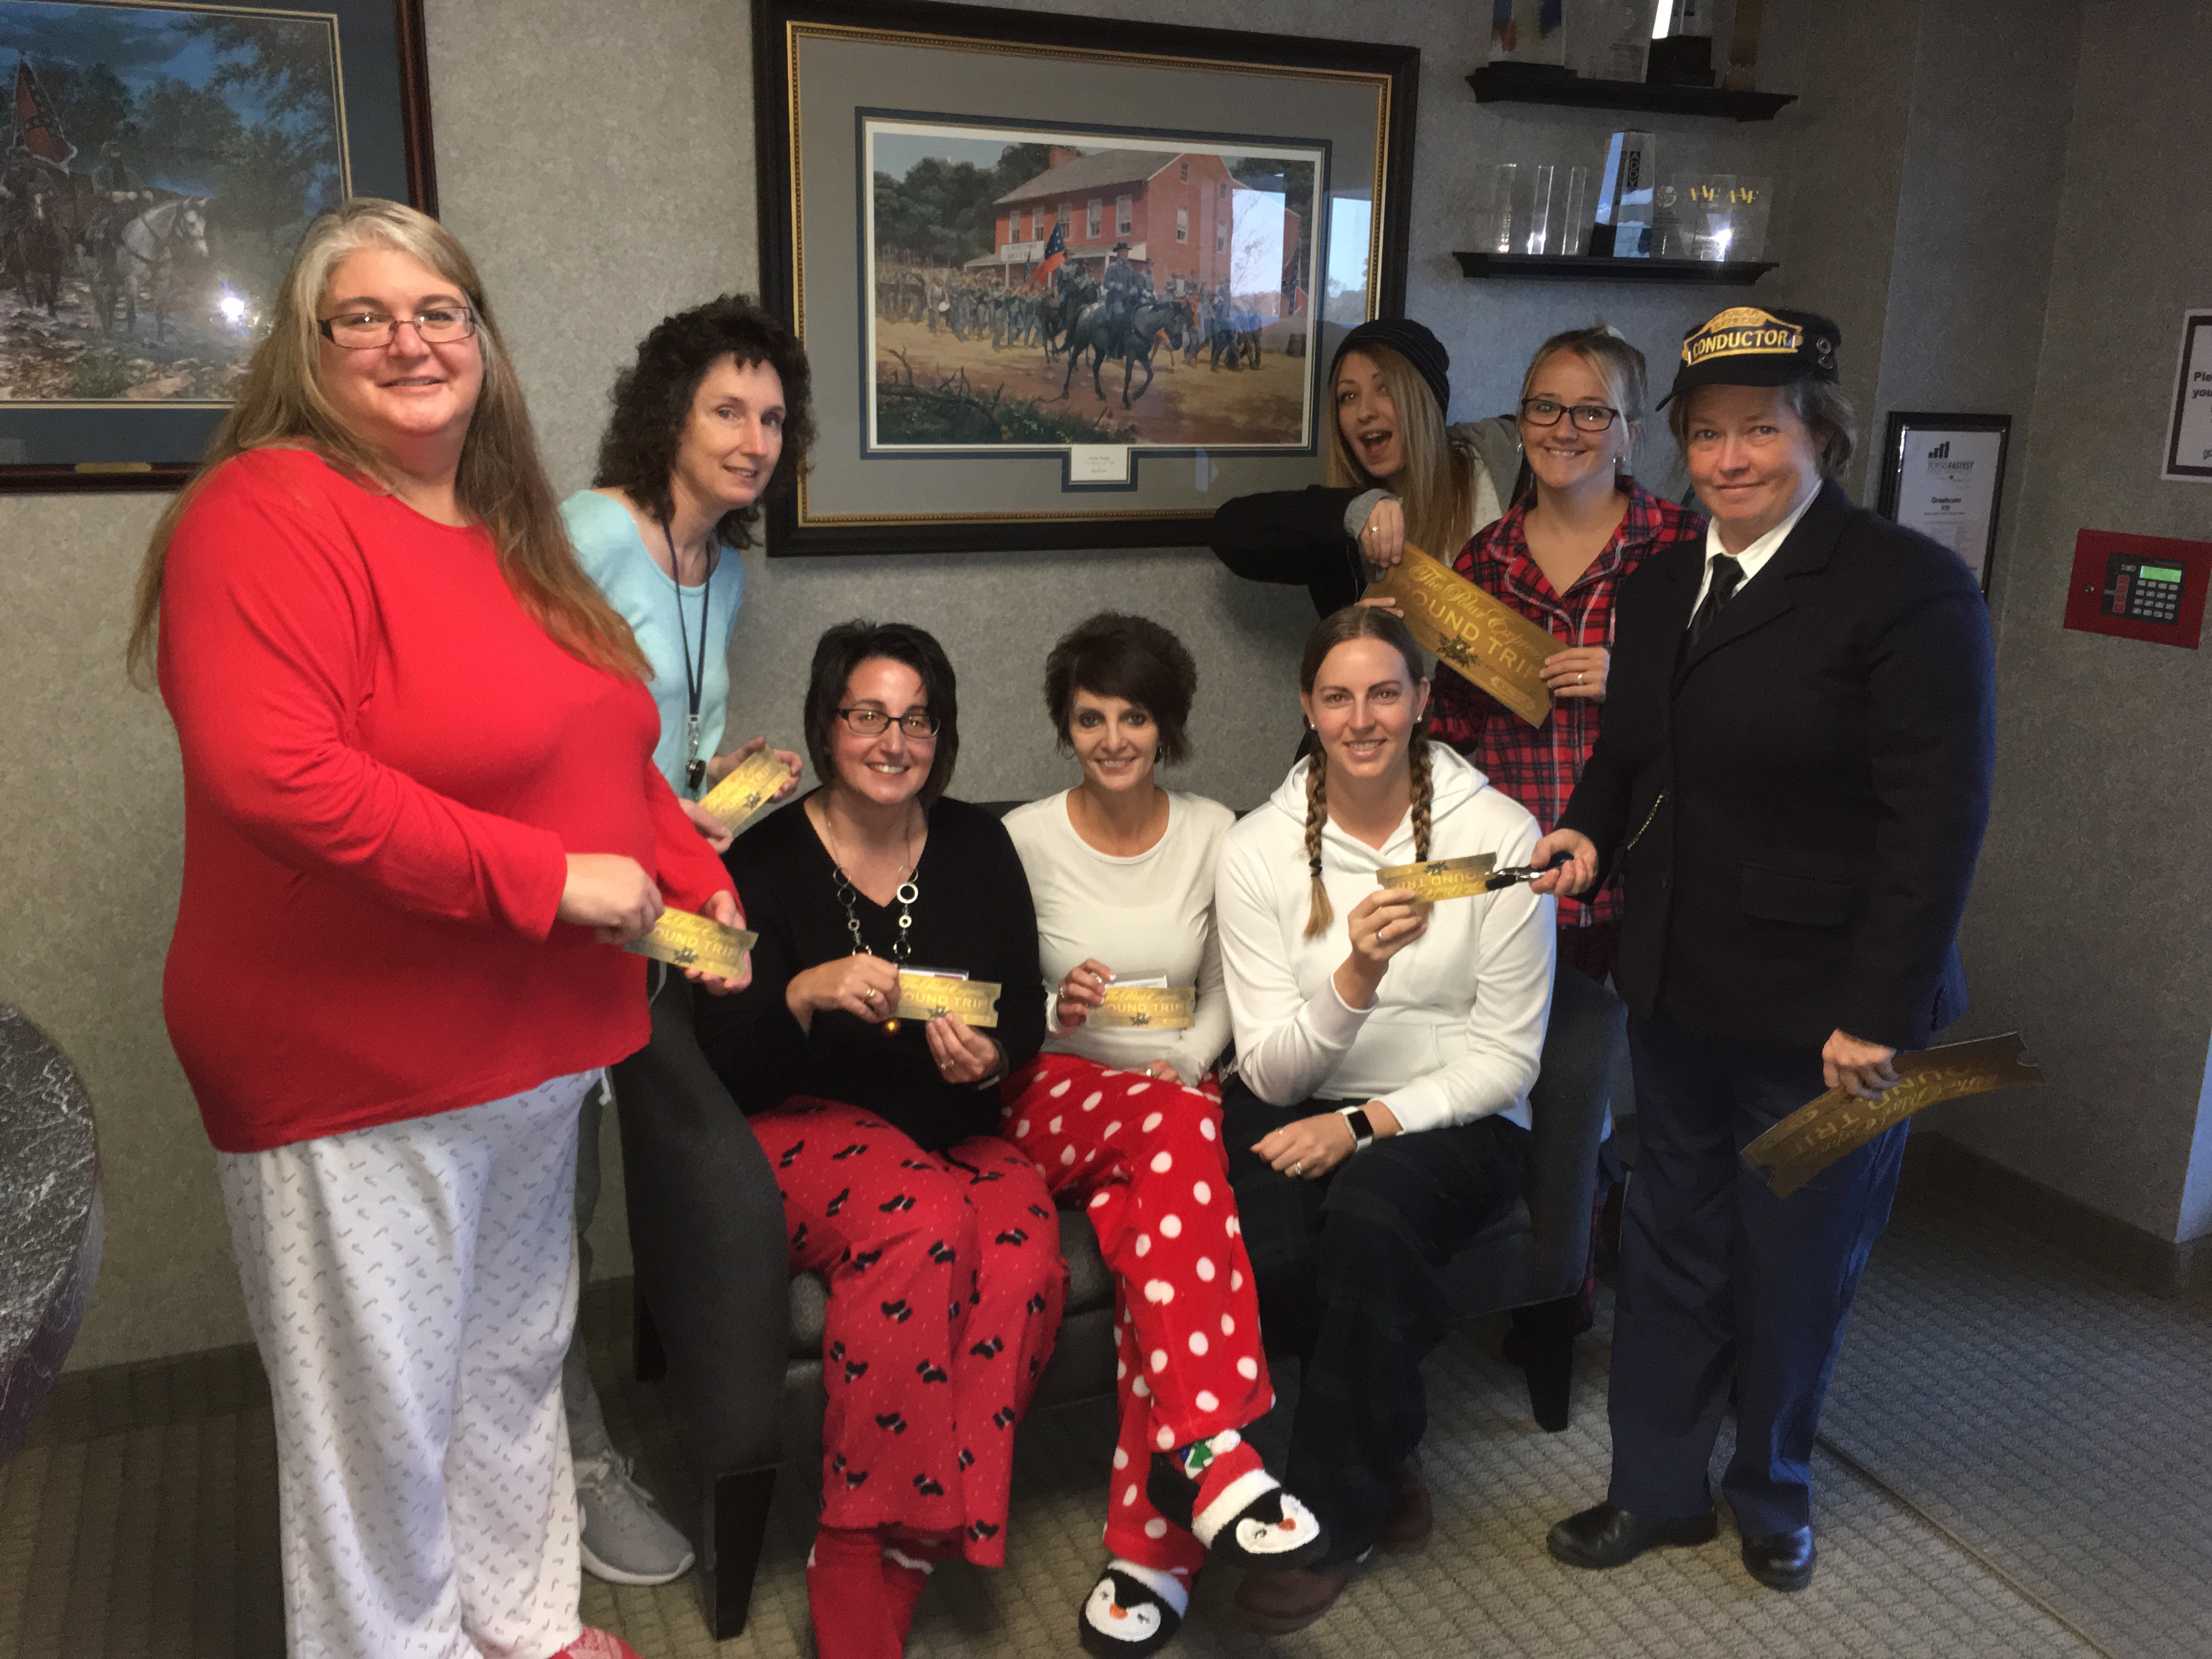 graphcom employees dressed as The Polar Express for spirit week